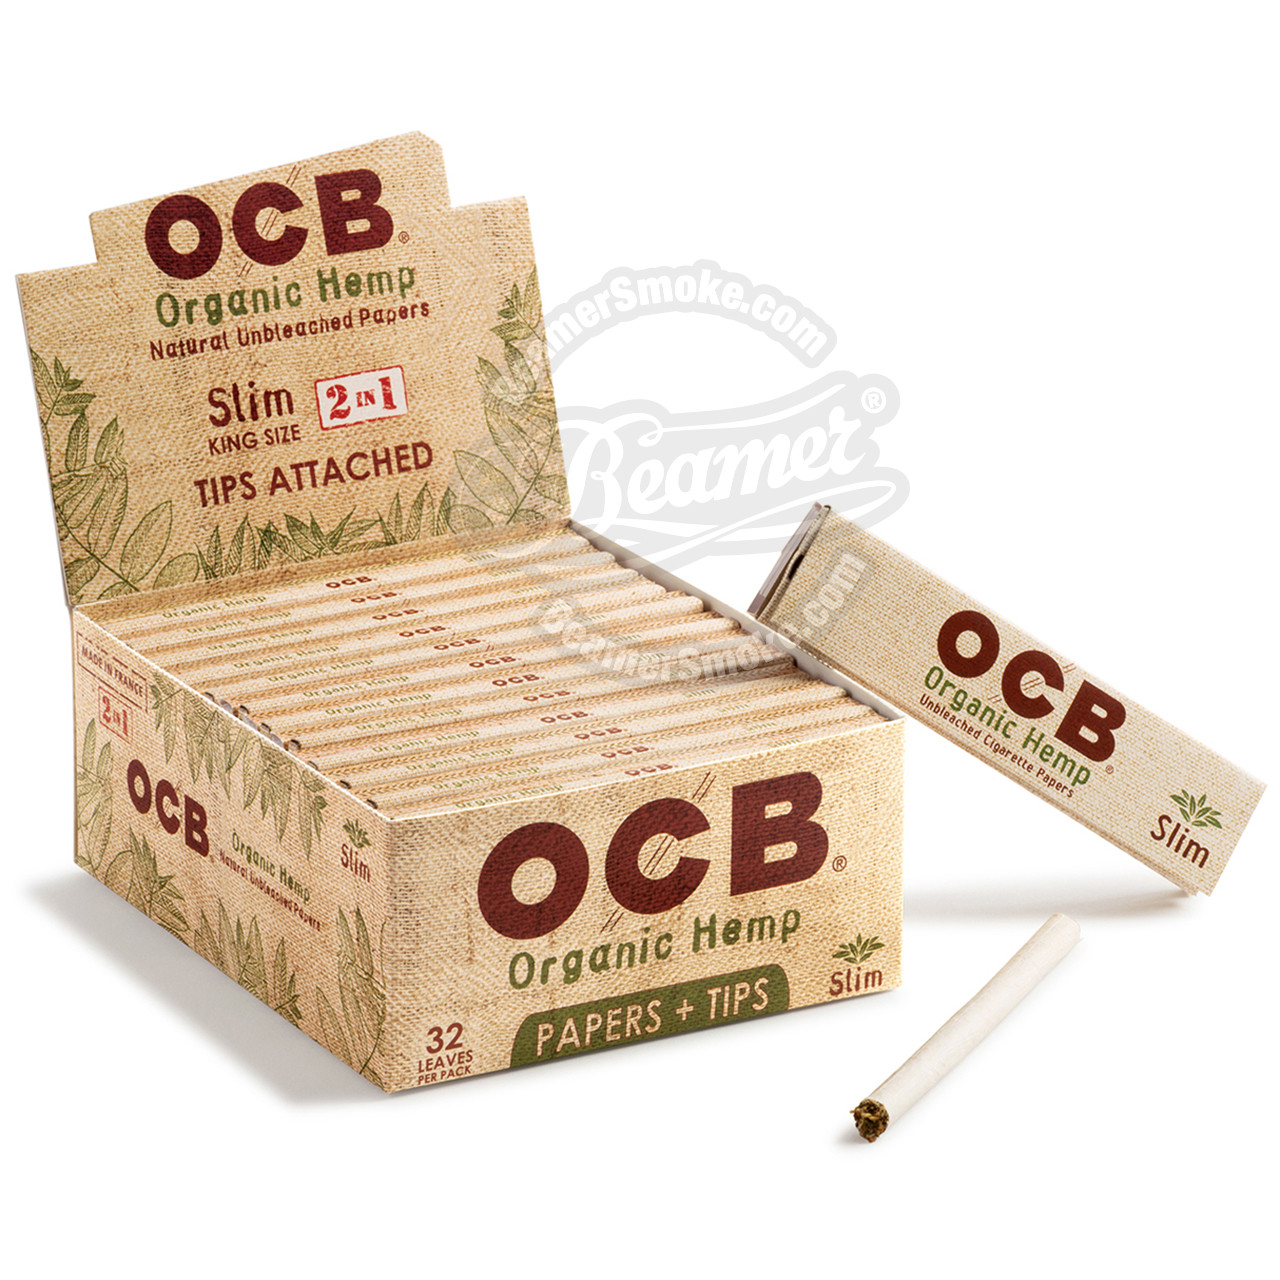 3 PACKS AUTHENTIC OCB SLIM KING SIZE ROLLING PAPERS 2 in 1 TIPS ATTACHED 